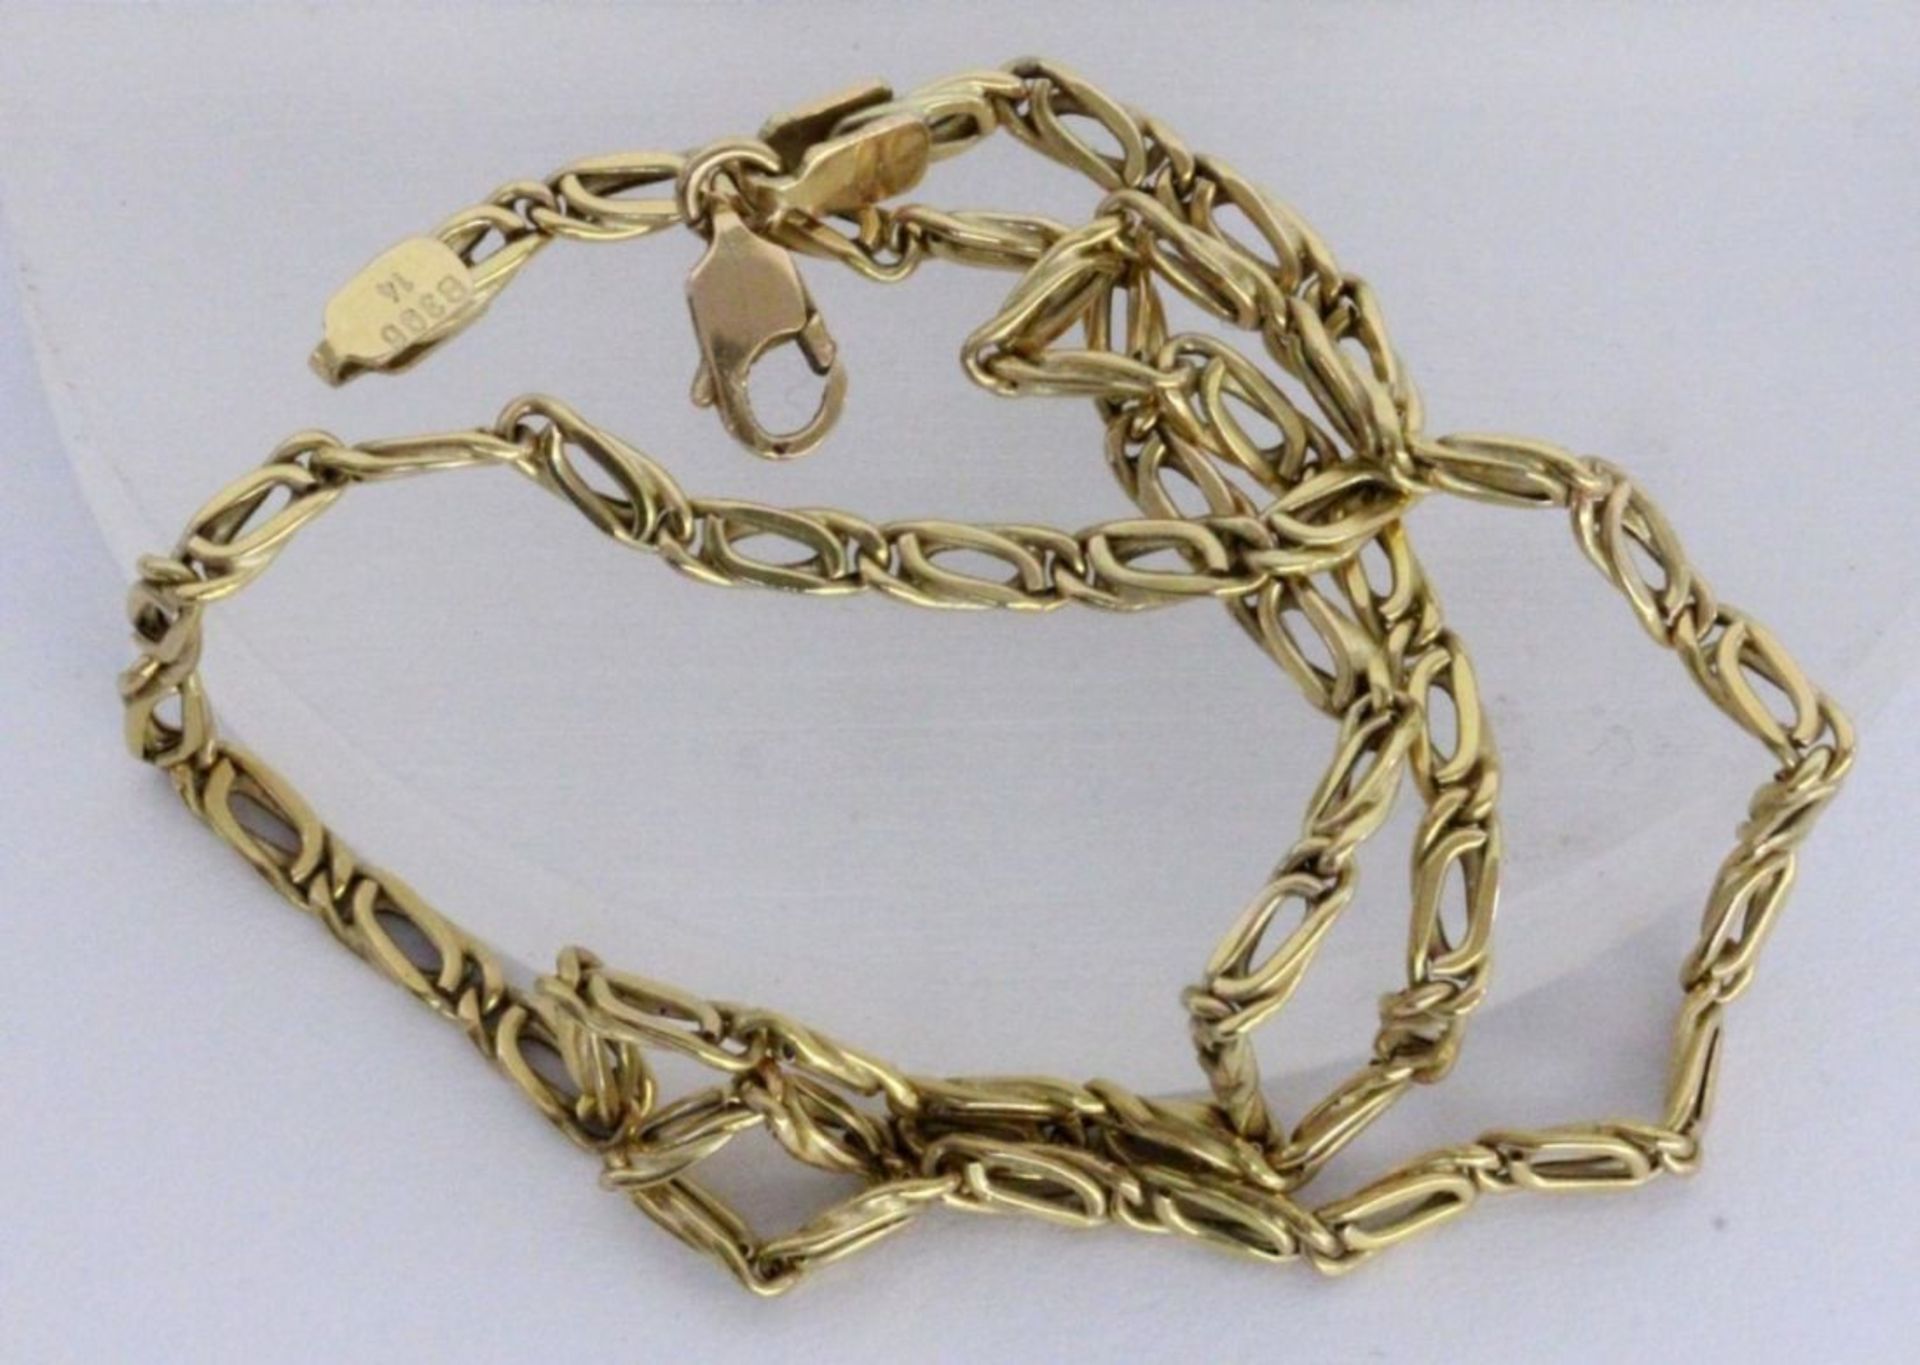 A NECKLACE 585/000 yellow gold with carabiner clasp. 45.5 cm long, approx. 9.2 grams. Keywords: